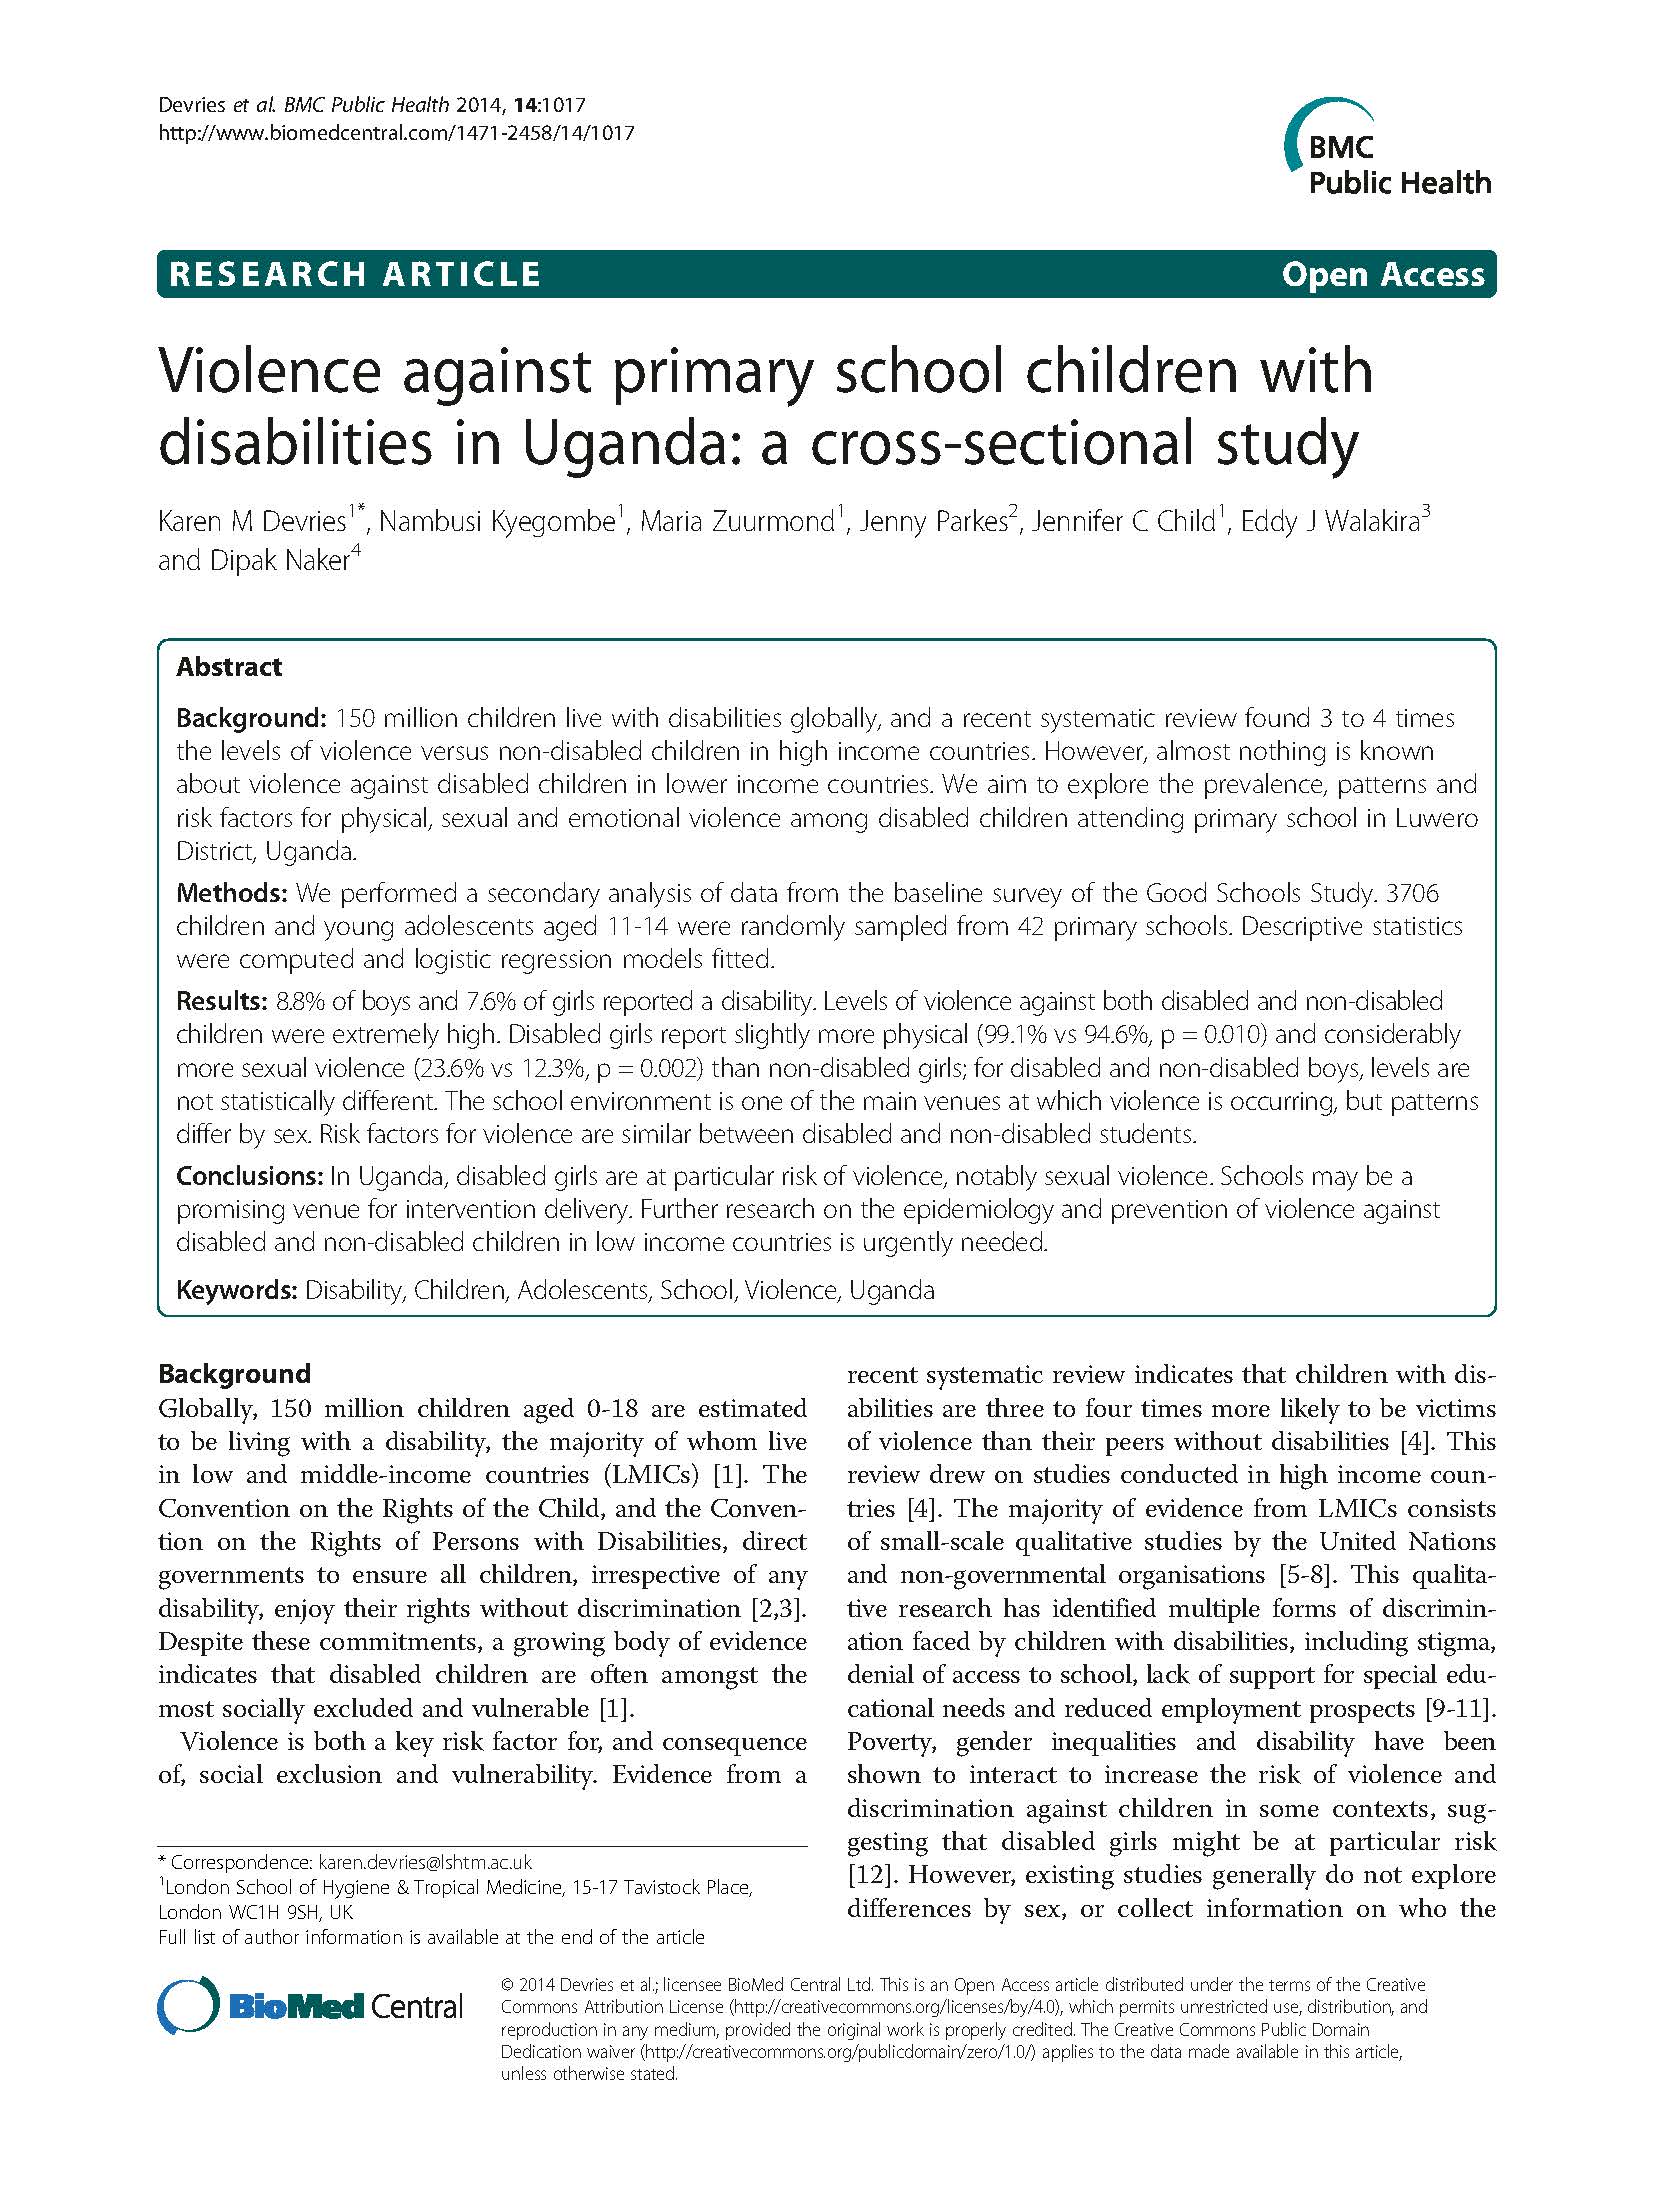 Violence against primary school children with disabilities in Uganda a cross-sectional study